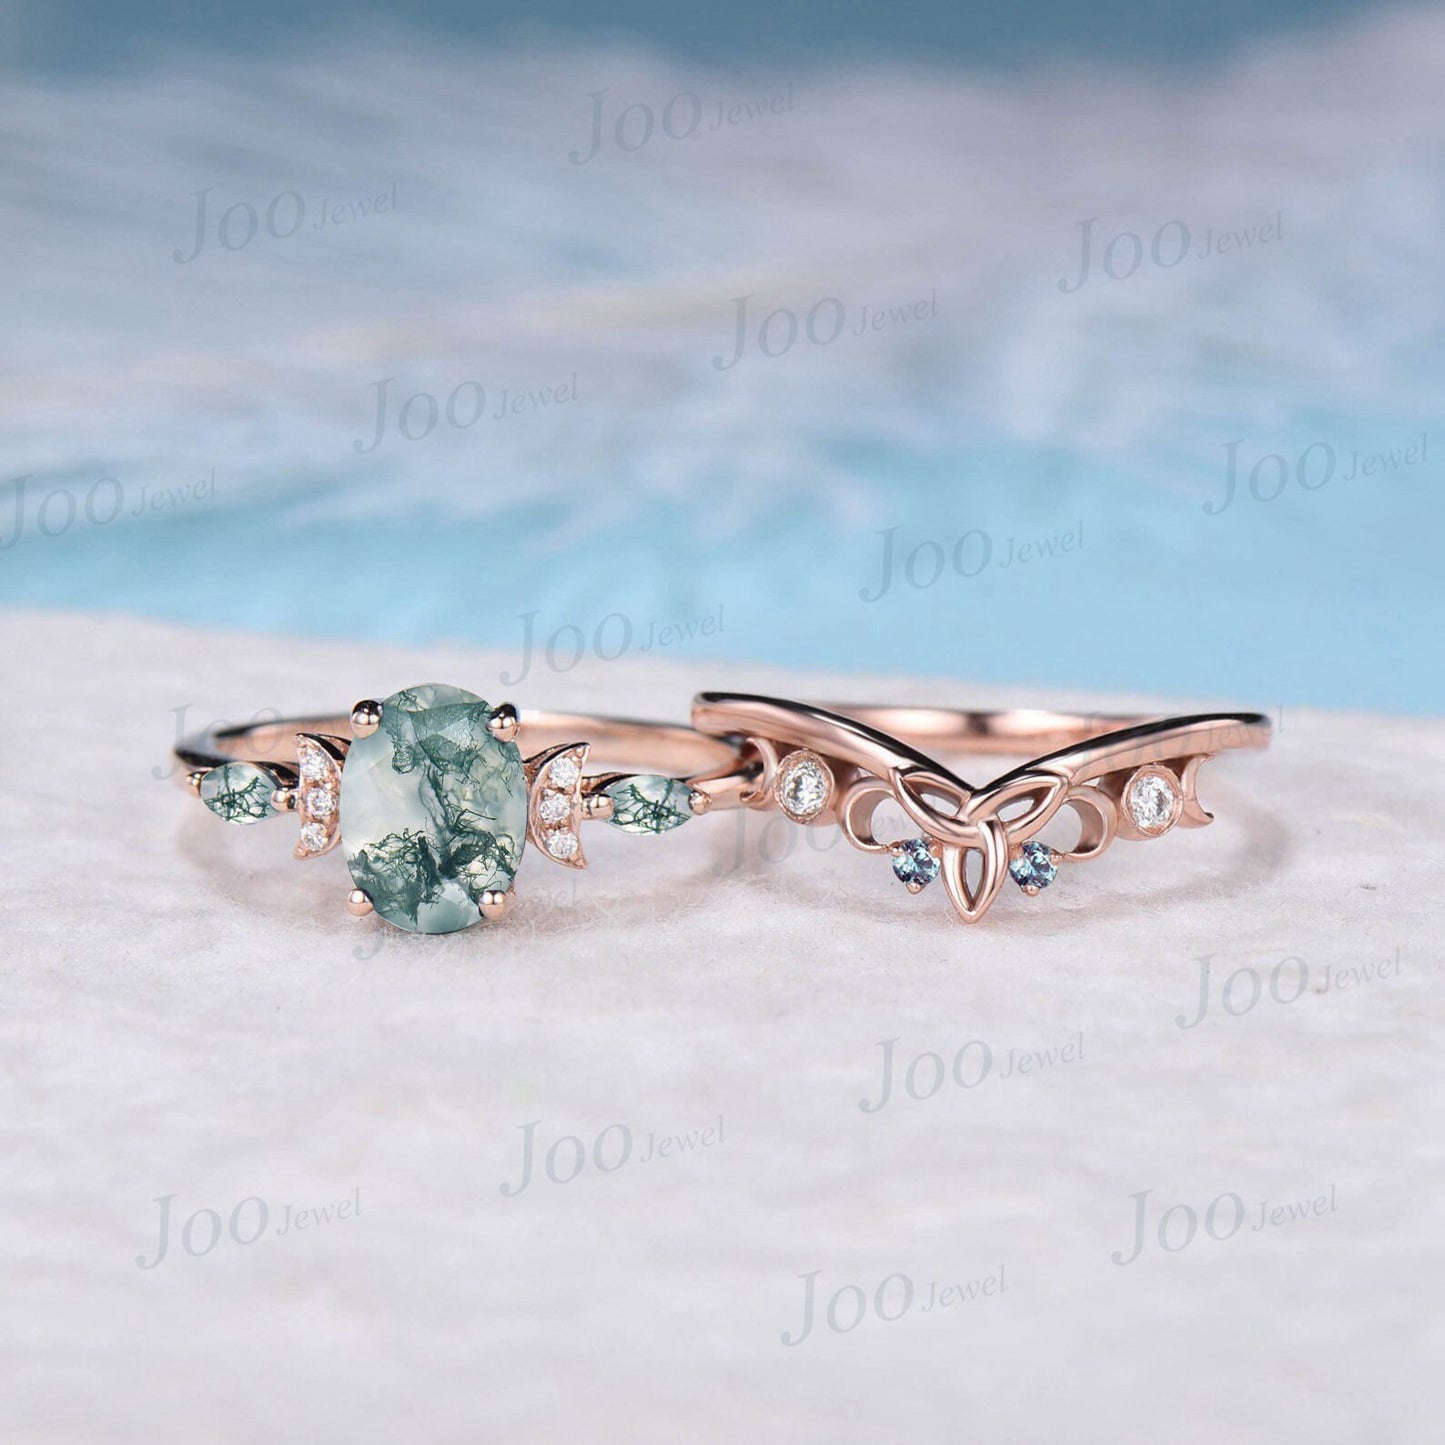 1.5ct Oval Cut Natural Moss Agate Diamond Celestial Engagement Ring Triple Moon Celtic Knot Alexandrite Band Rose Gold Moss Agate Bridal Set